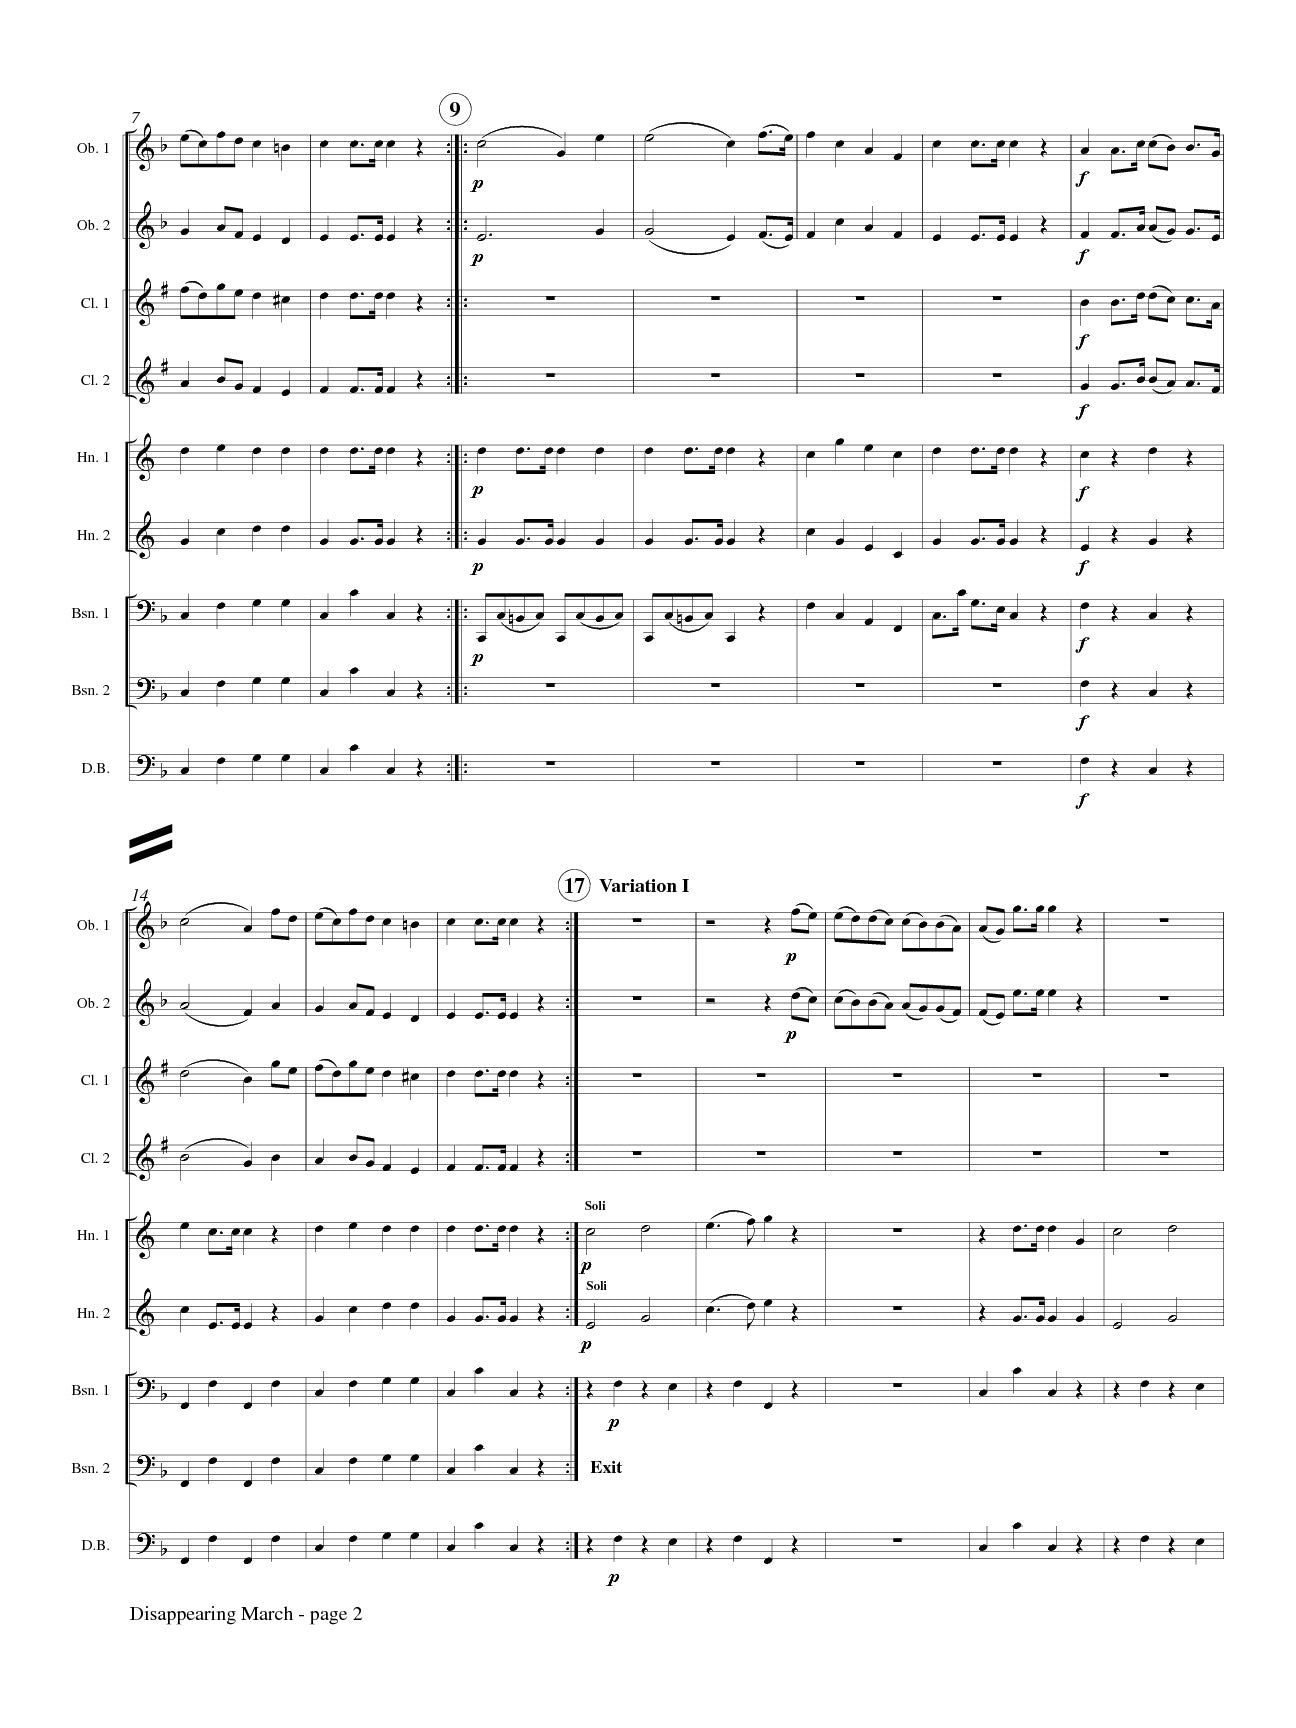 Druschetzky (arr. Christopher Weait) - Disappearing March from Partita No. 21